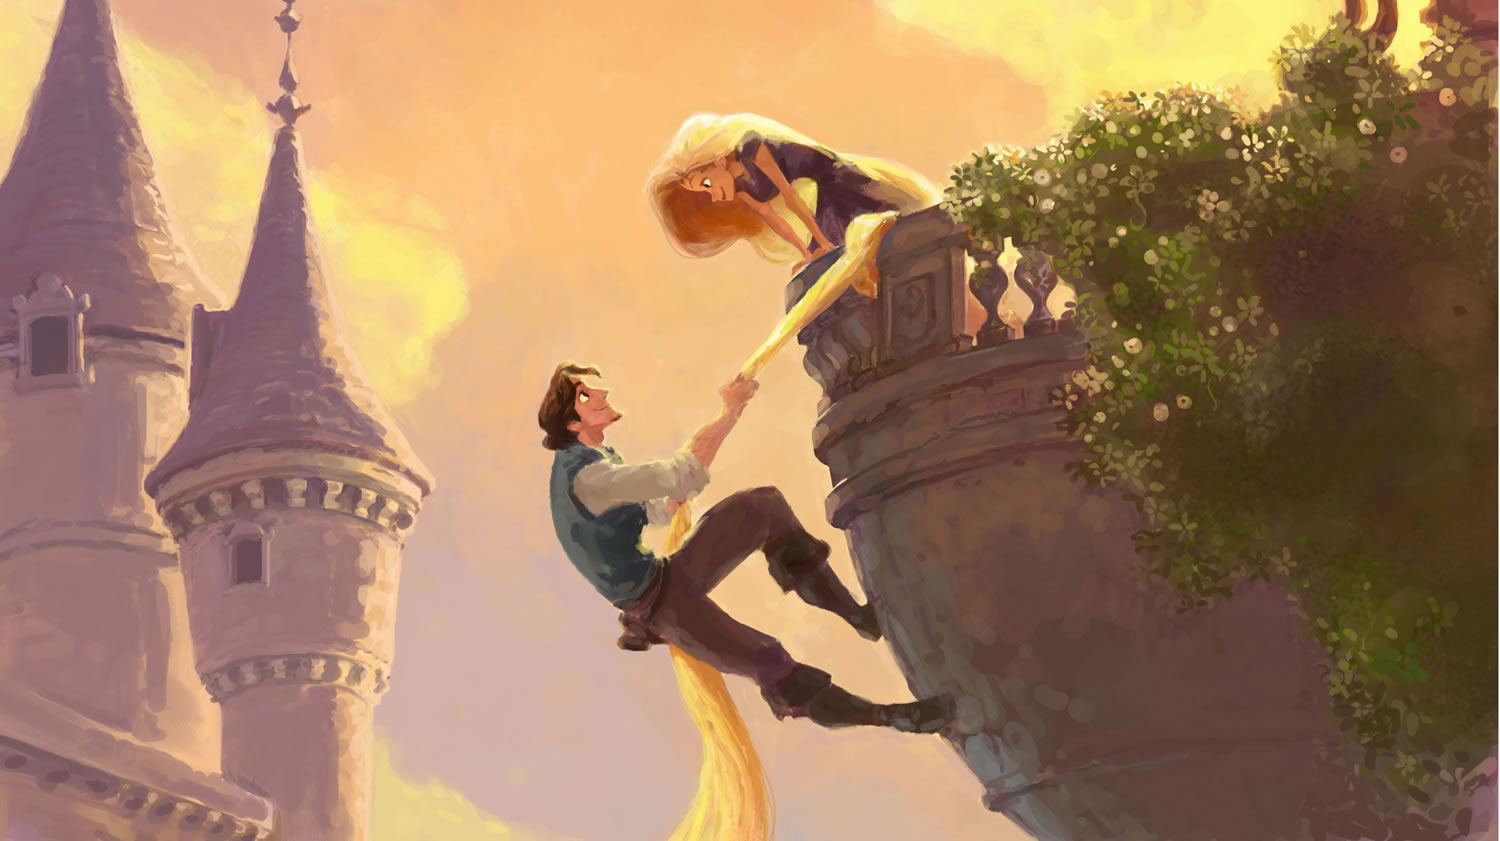 Concept Art Of Flynn And Rapunzel From Disney S Movie - Tangled Concept Art - HD Wallpaper 